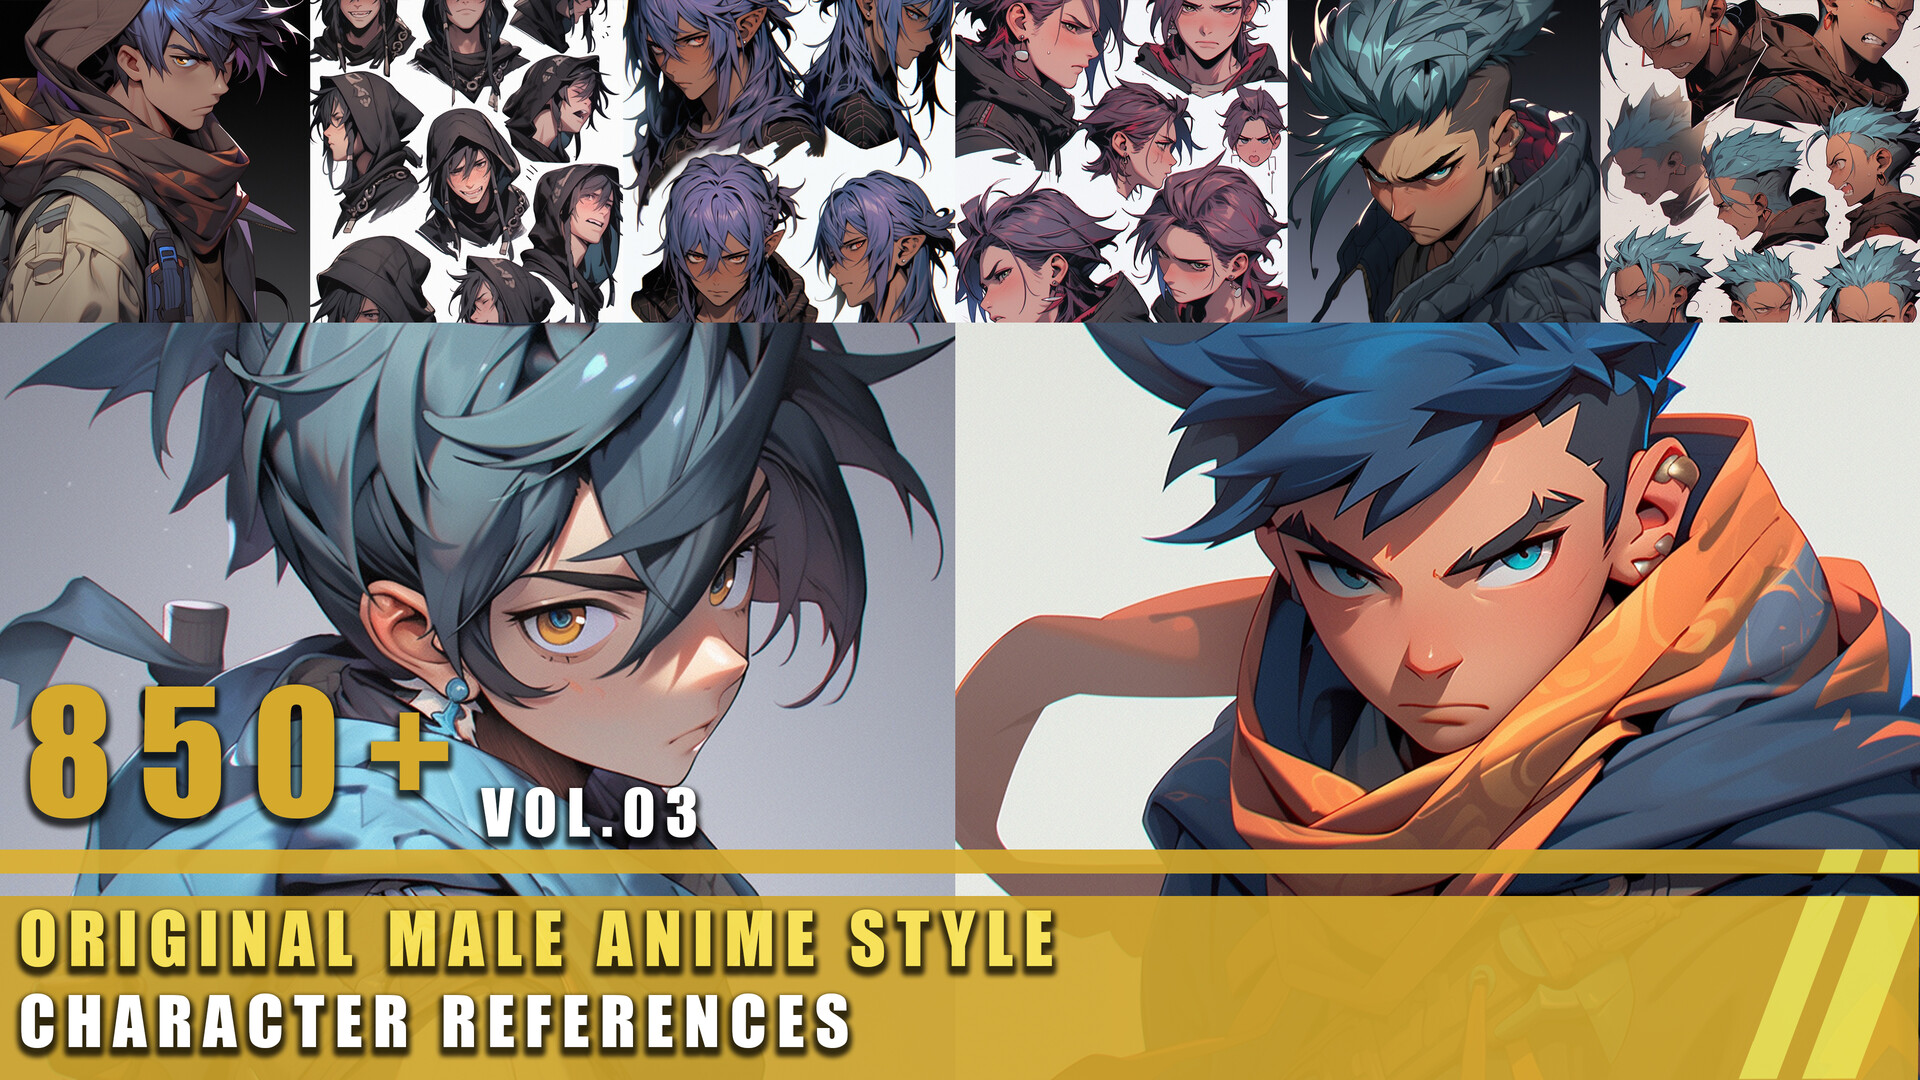 Anime style original character reference sheet, male character with light  blue and yellow hair, wearing flashy clothing